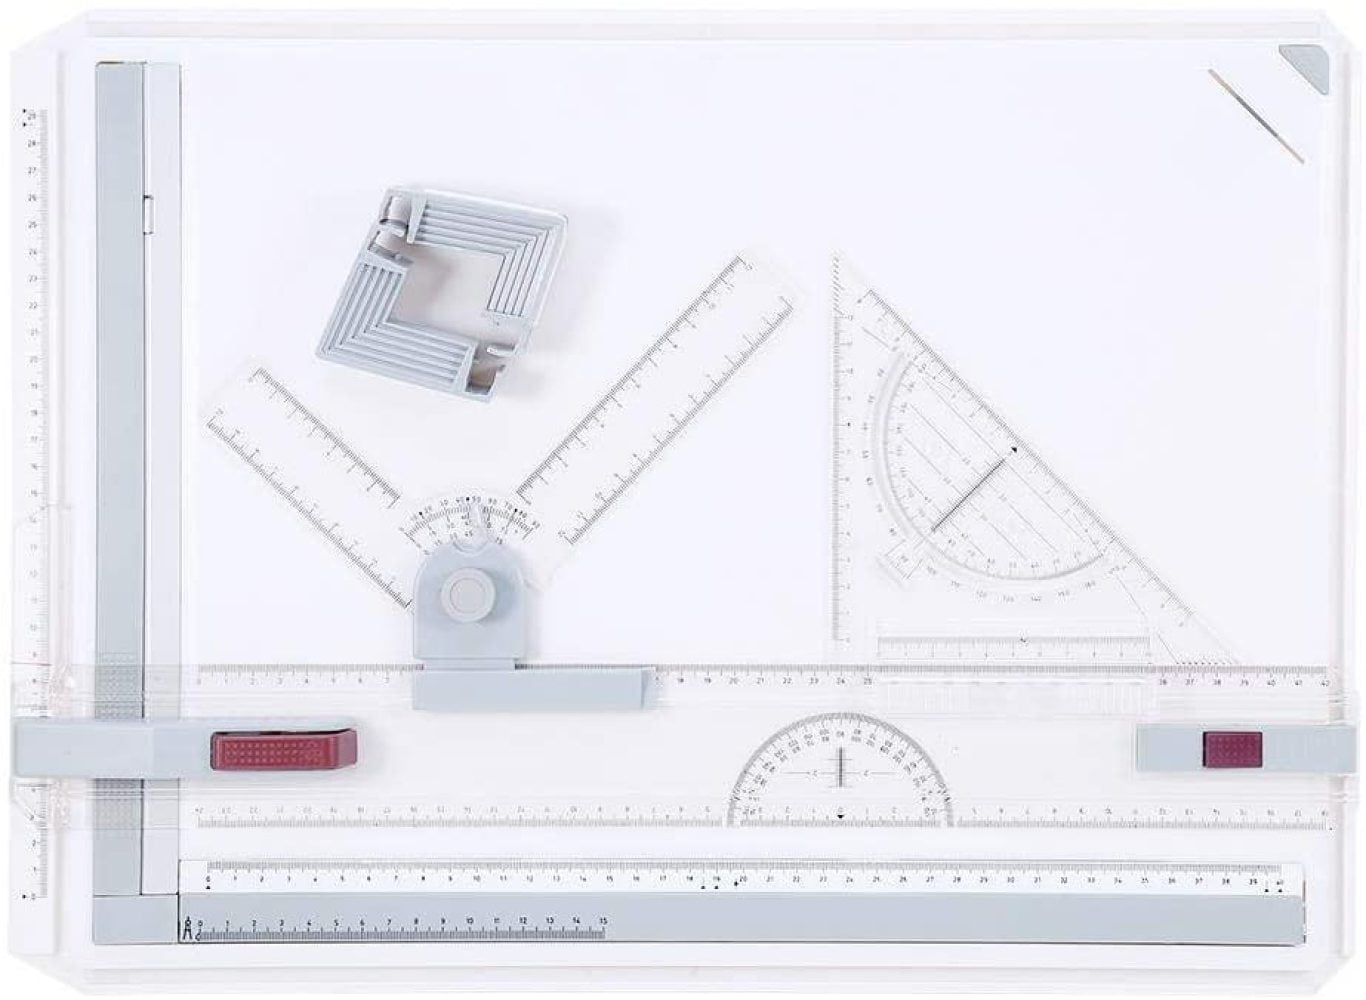 Set Square Clamps A3 Drawing Table Board Adjustable Measuring System Drawing Board with Parallel Motion Anti Slip Support Legs Sliding Ruler Protractor